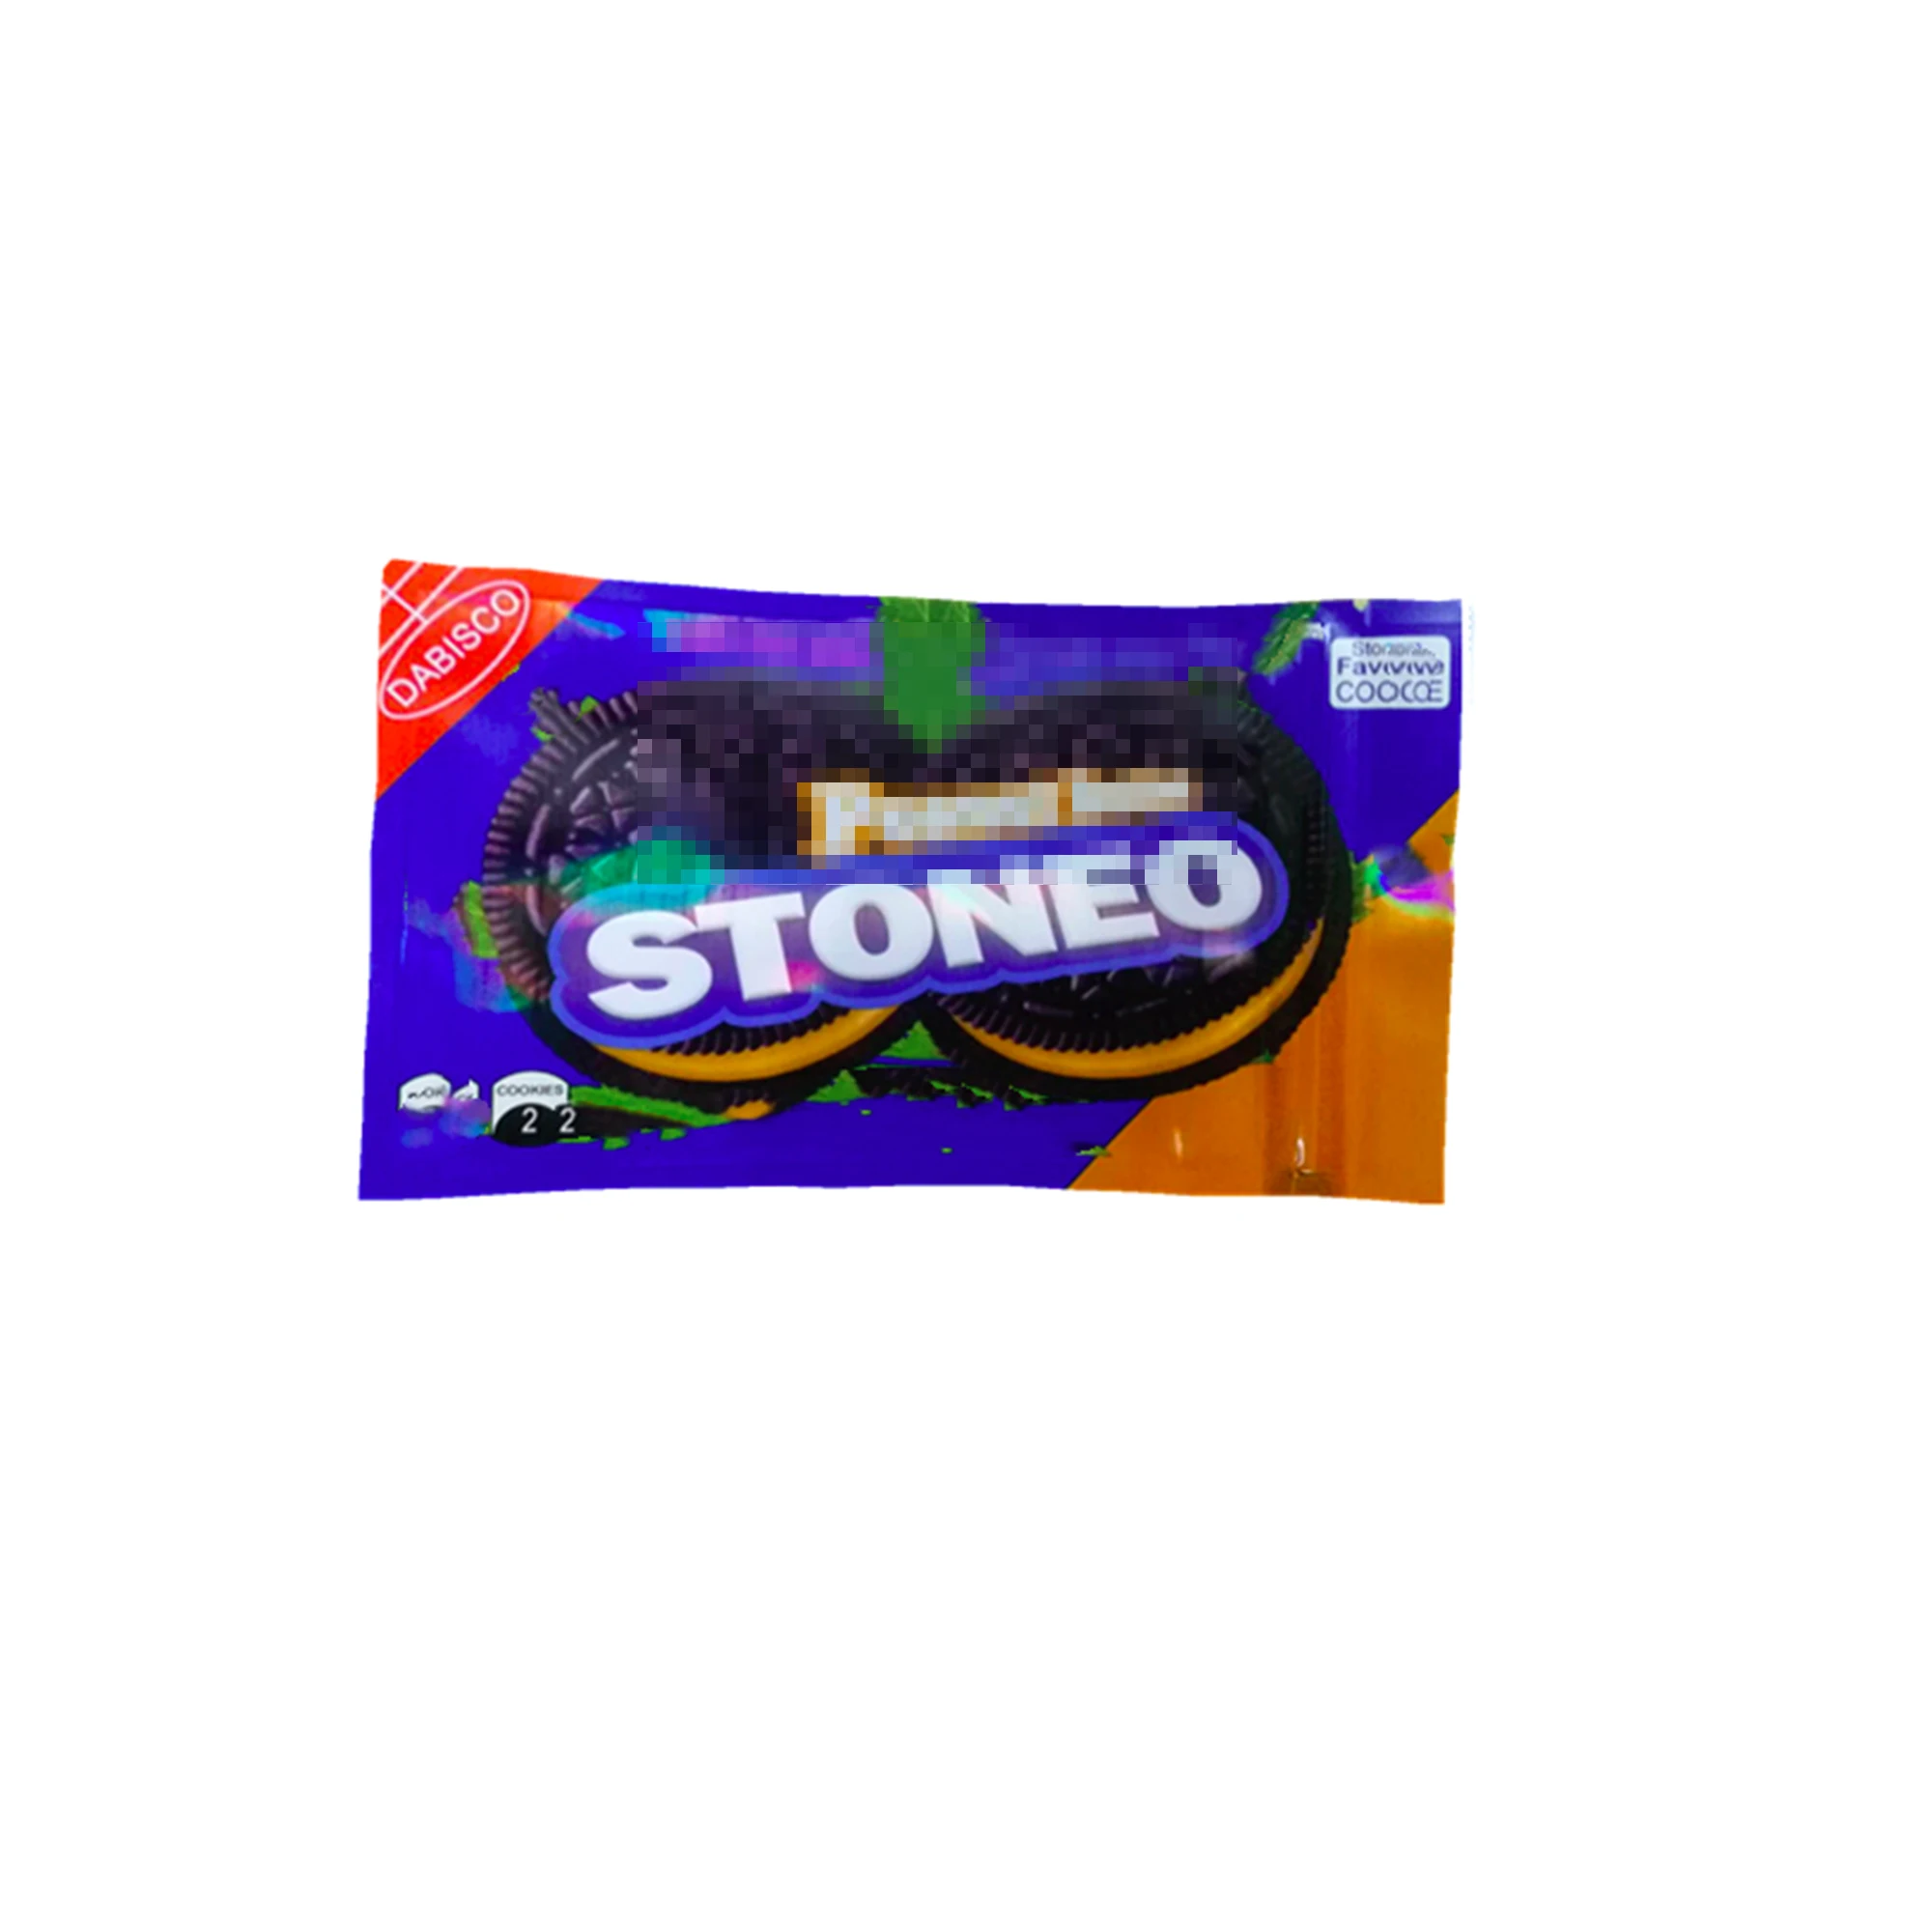 New Stoneo Peanut butter Chocolate Double Stuff Mylar Bag with Resealable Zipper